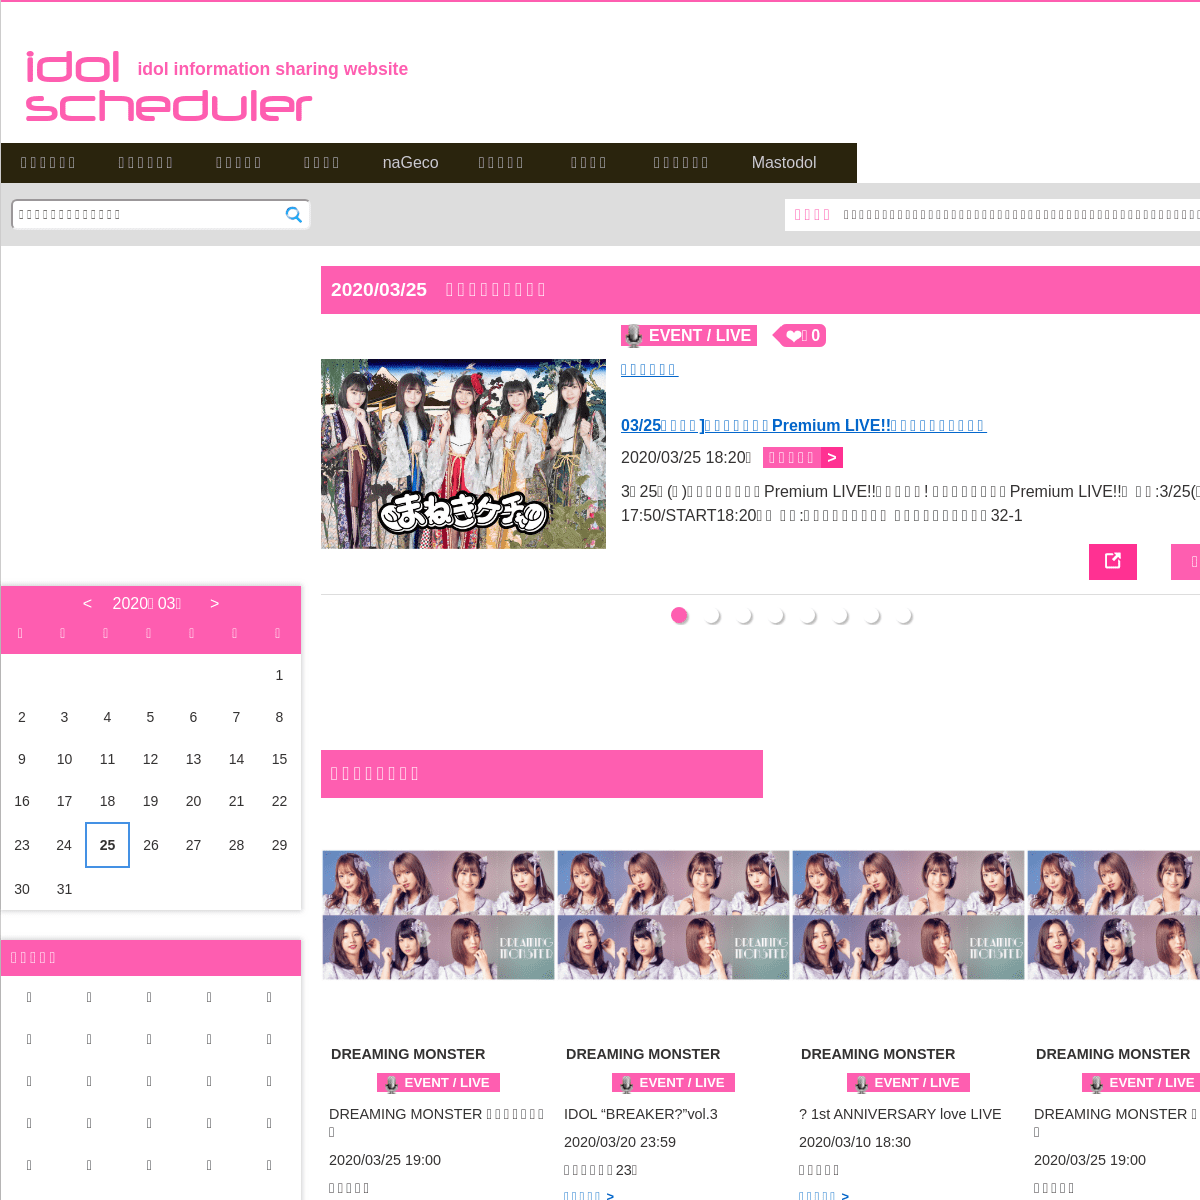 A complete backup of idolscheduler.jp